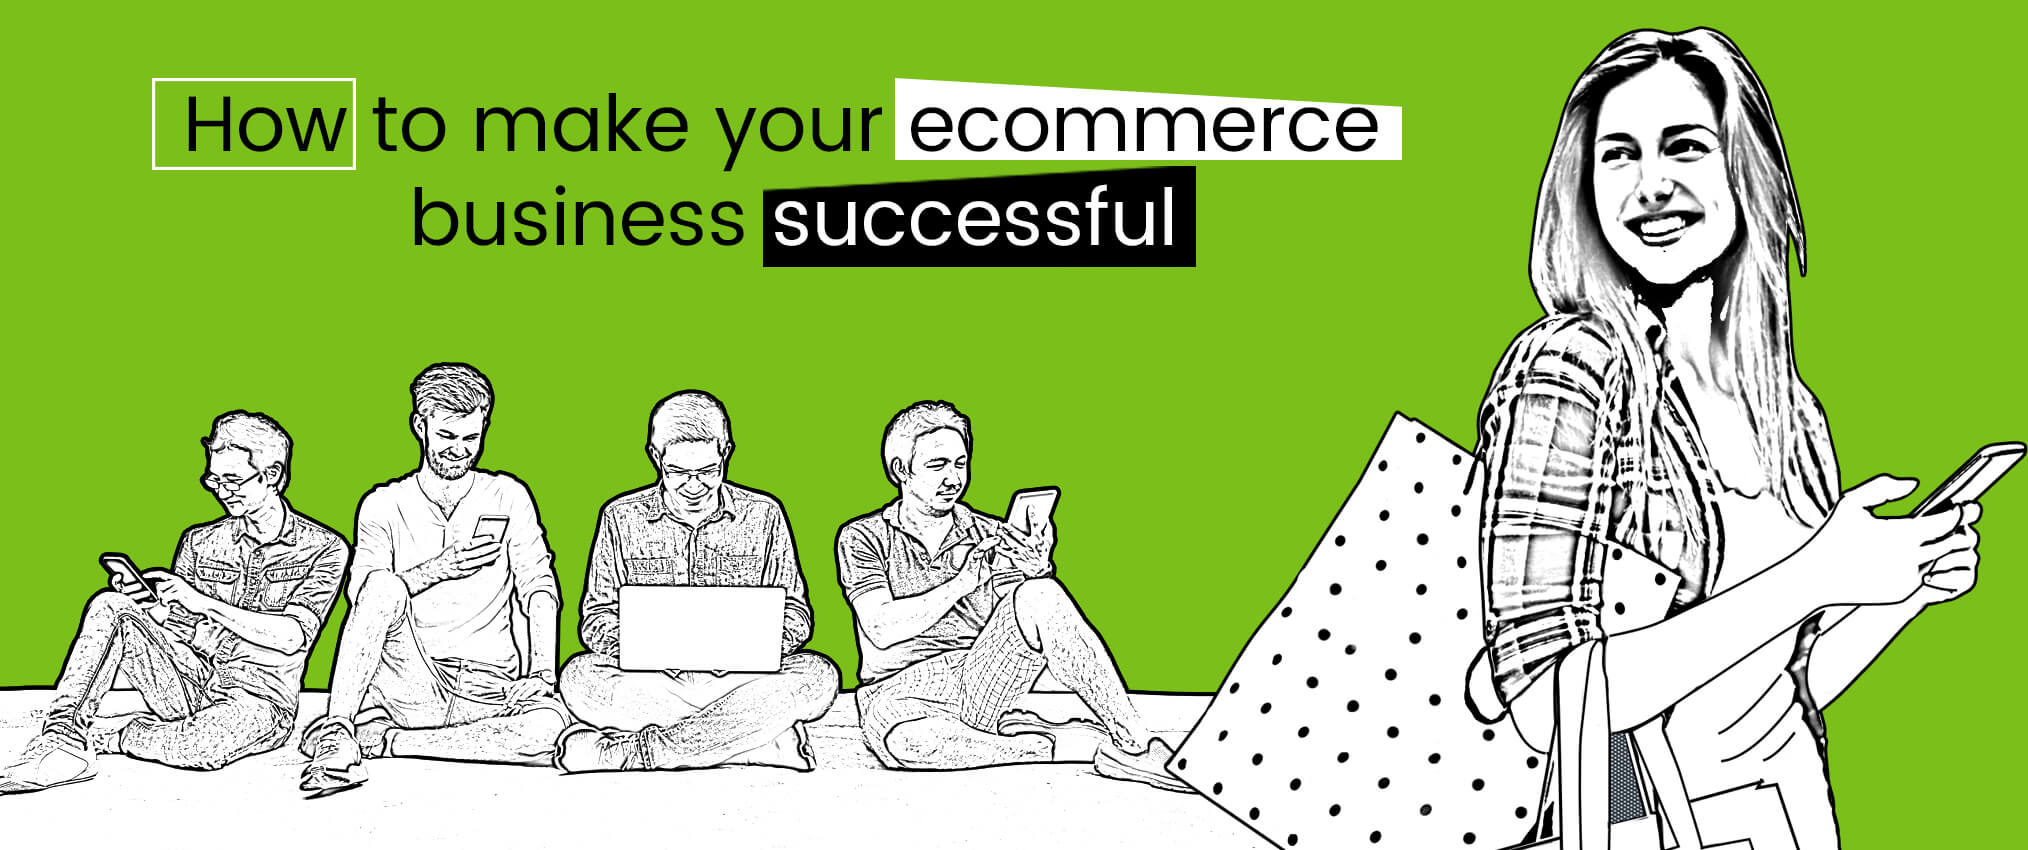 How to make your ecommerce business successful?